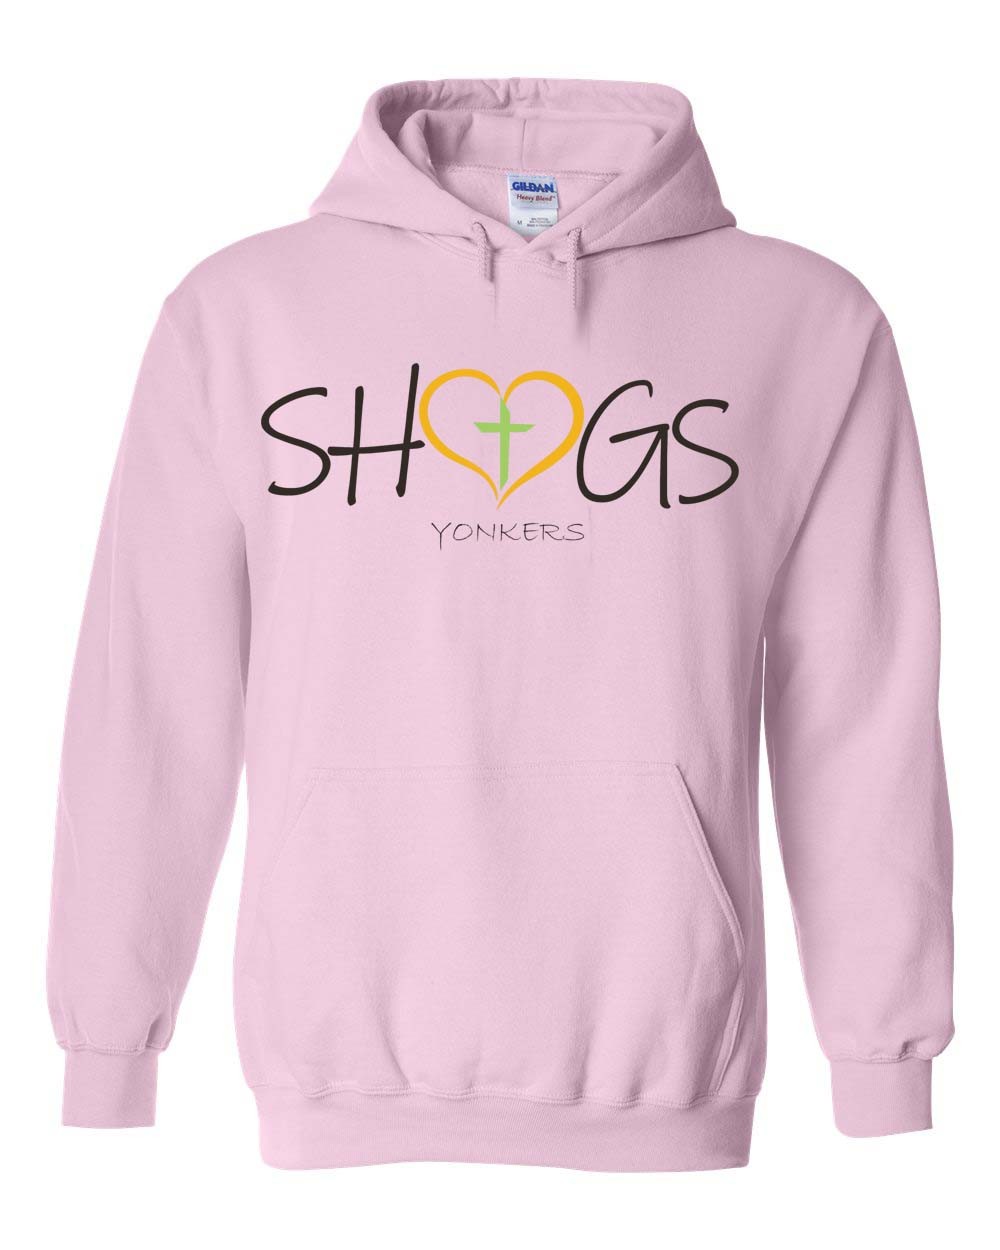 SHGS Spirit Pullover Hoodie w/ Heart Logo - Please Allow 2-3 Weeks for Delivery